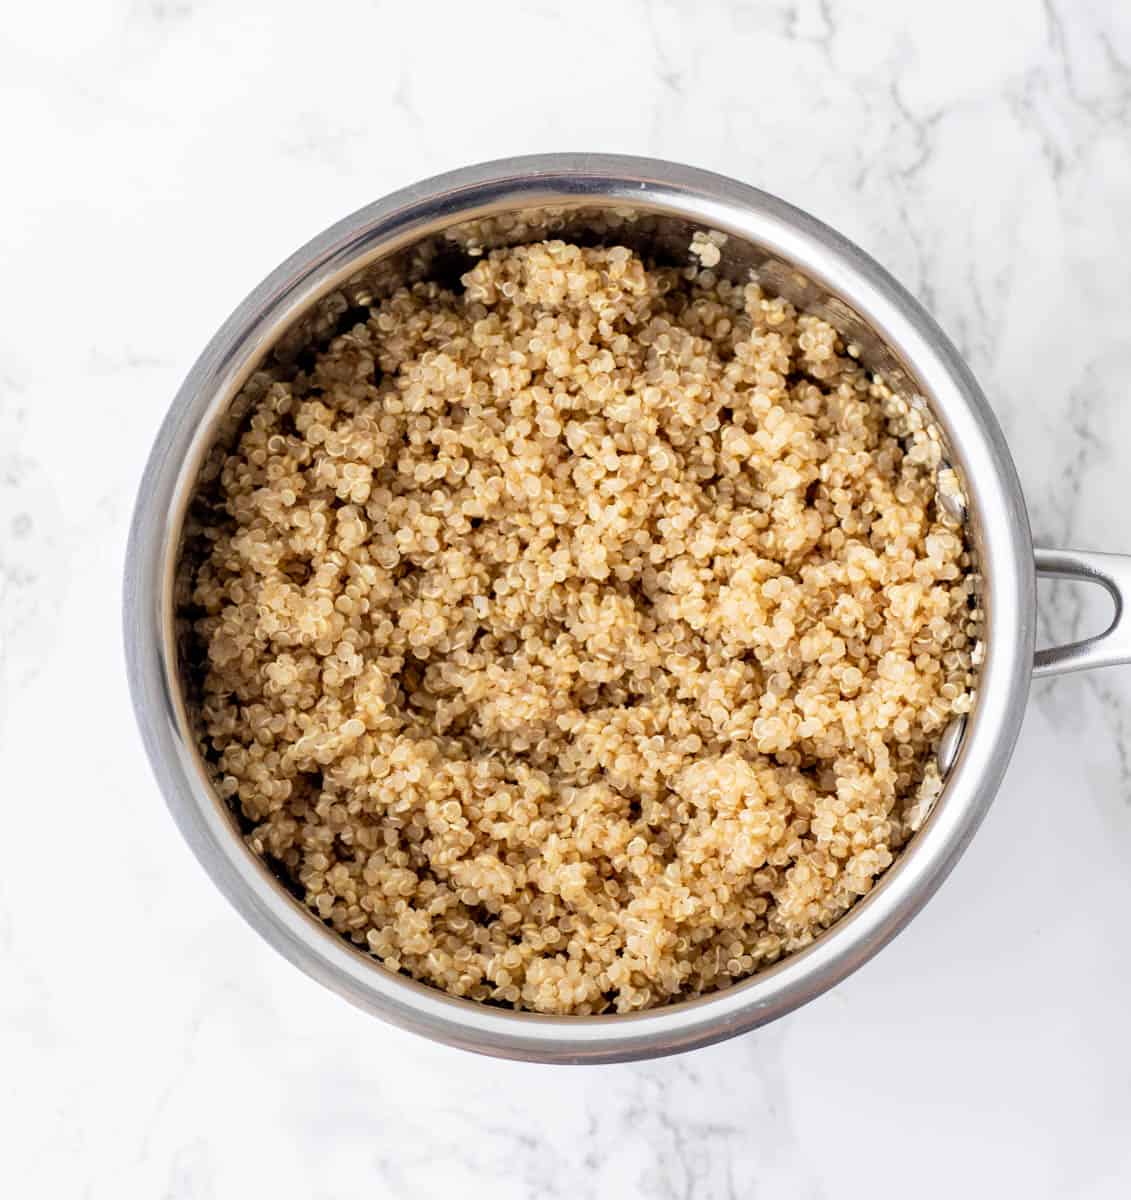 Cooked pot of quinoa on marble background.